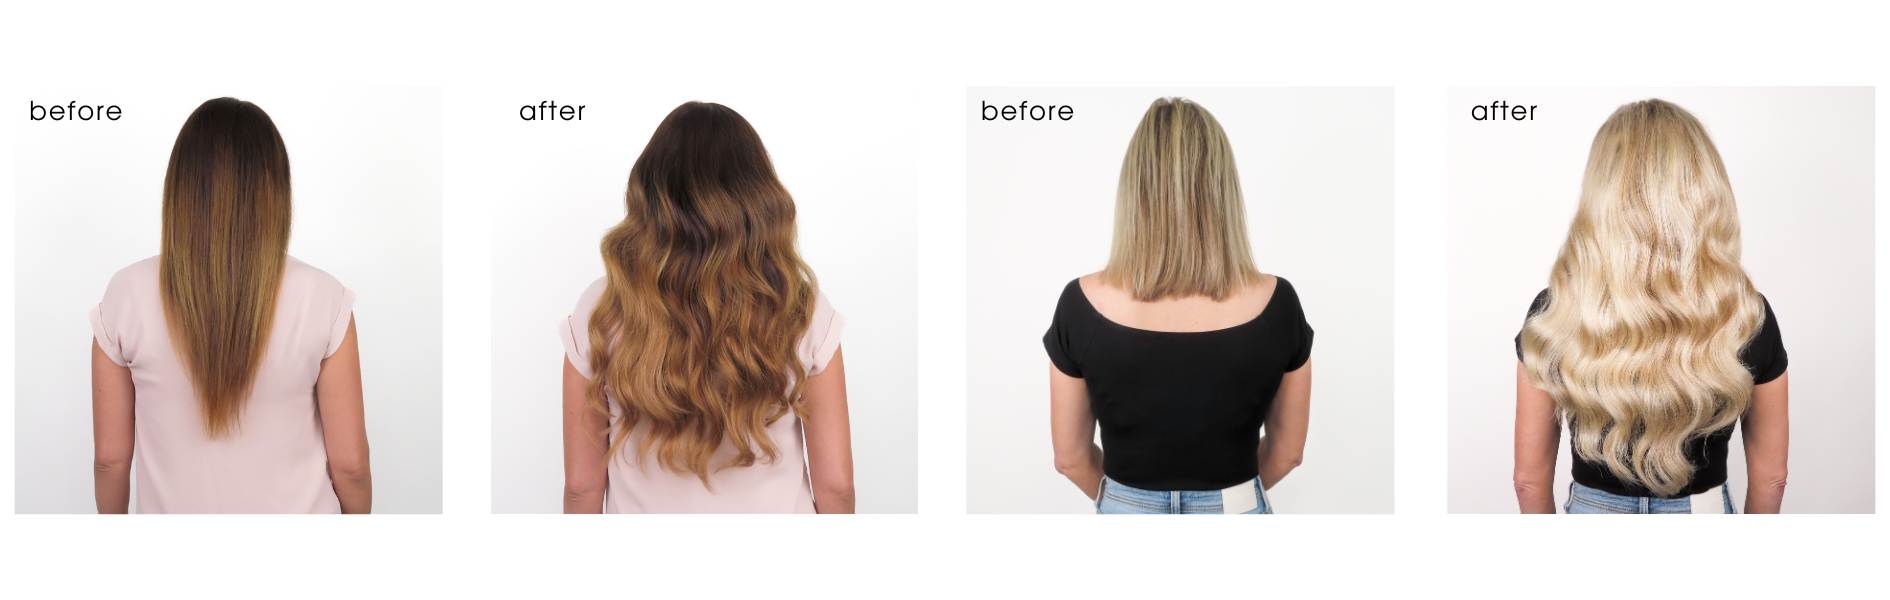 Top Reasons Why You Need Clip In Hair Extensions - CASHMERE HAIR